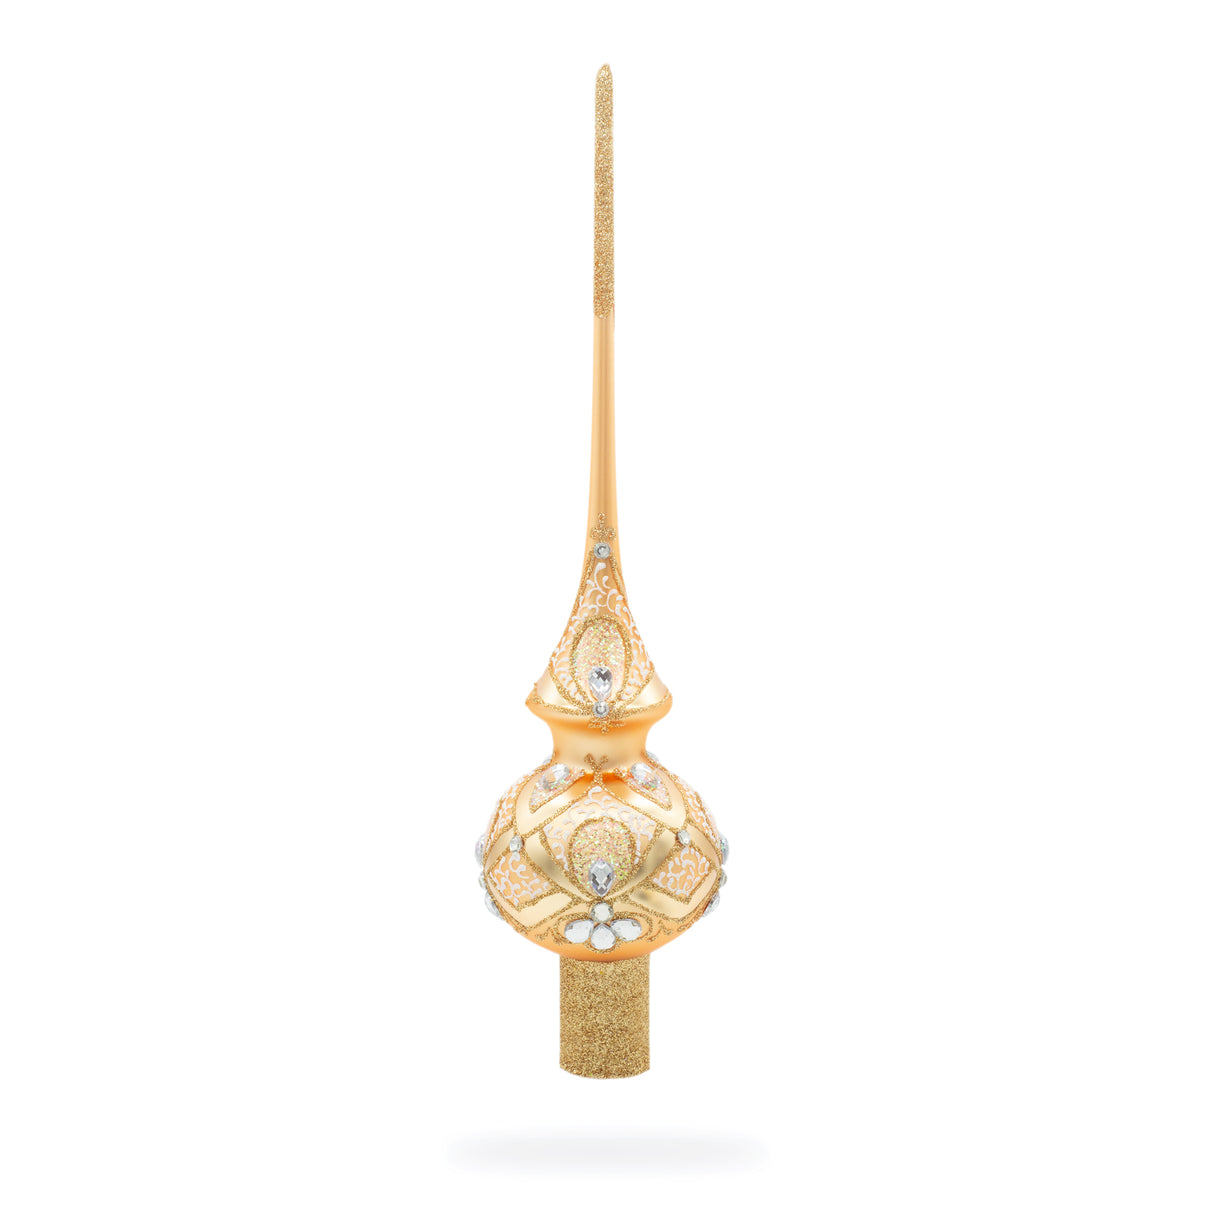 Dimensional Diamonds on Rose Gold Artisan Hand Crafted Mouth Blown Glass Christmas Tree Topper 11 Inches in Ivory color, Triangle shape